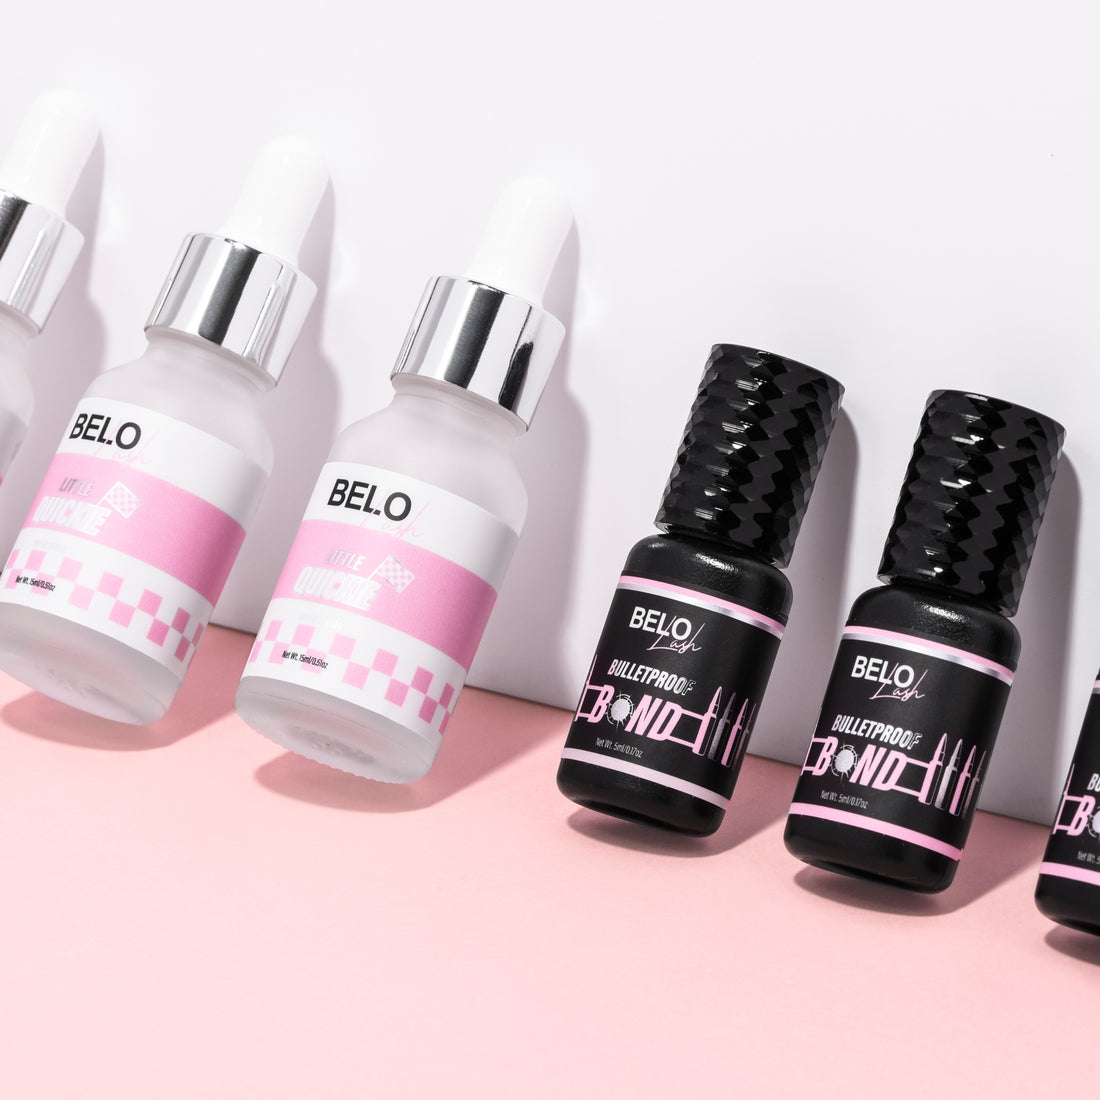 A line of lash adhesive bottles lean against a wall